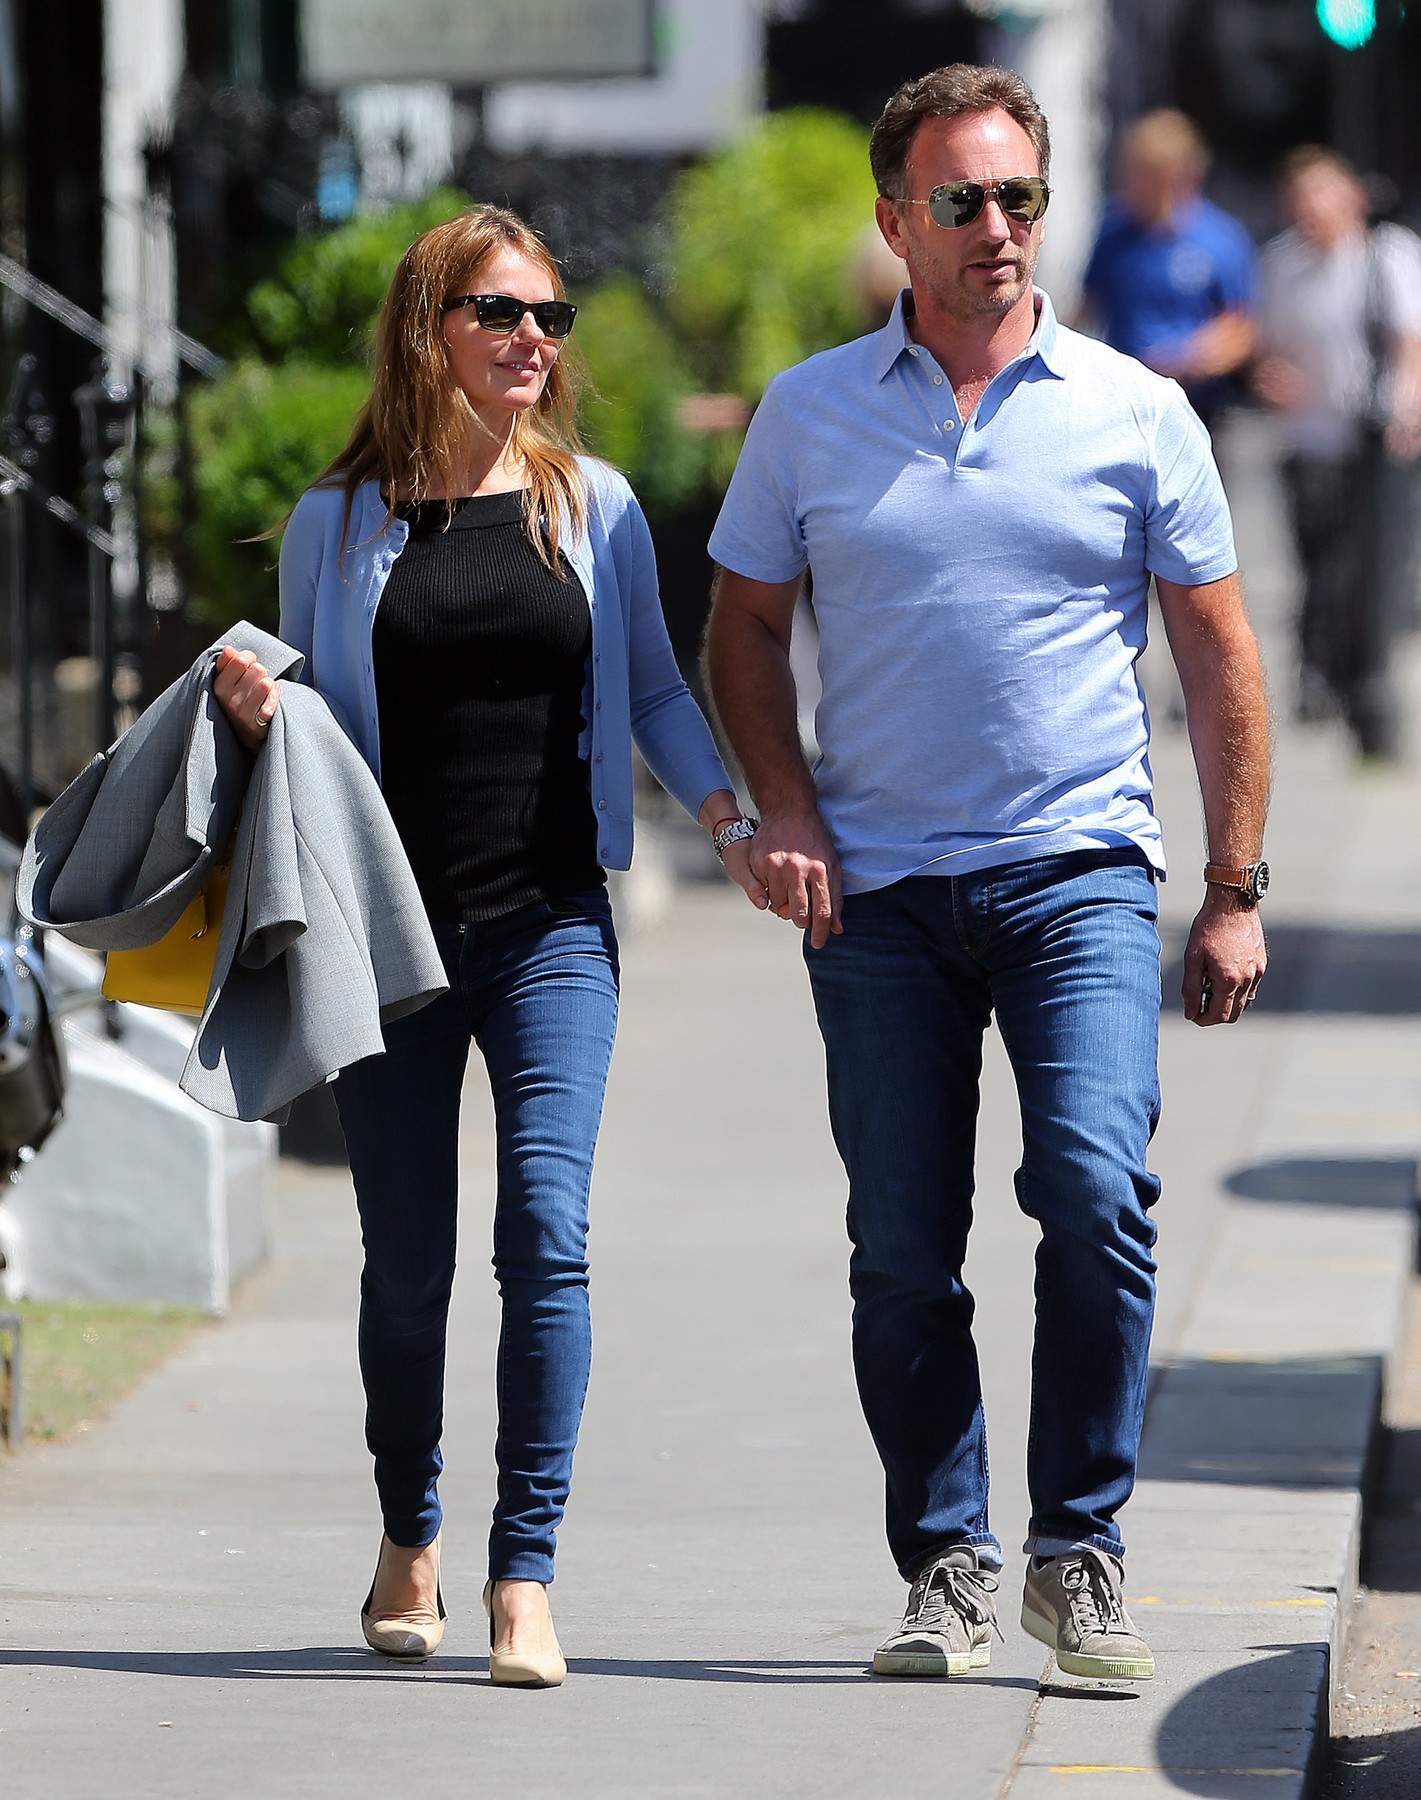 (EXCLUSIVE PICTURES) Geri Halliwell and husband Christian Horner out shopping for a new kitchen at Smallbone of Devizes in Kightsbridge. The former Spice Girl, wearing a stylish grey coat, black top, skinny jeans and a pair of nude heels. Geri was all smiles as she and her husband walked hand in hand on a glorious sunny day in London... UK. 06/06/2018, Image: 374017543, License: Rights-managed, Restrictions: (EXCLUSIVE PICTURES) FOR NON UK RIGHTS AND WEB USE PLEASE CONTACT PICTURE DESK - pictures@gotchaimages.co.uk, Model Release: no, Credit line: JAMESY/GOTCHA IMAGES / Gotcha Images / Profimedia